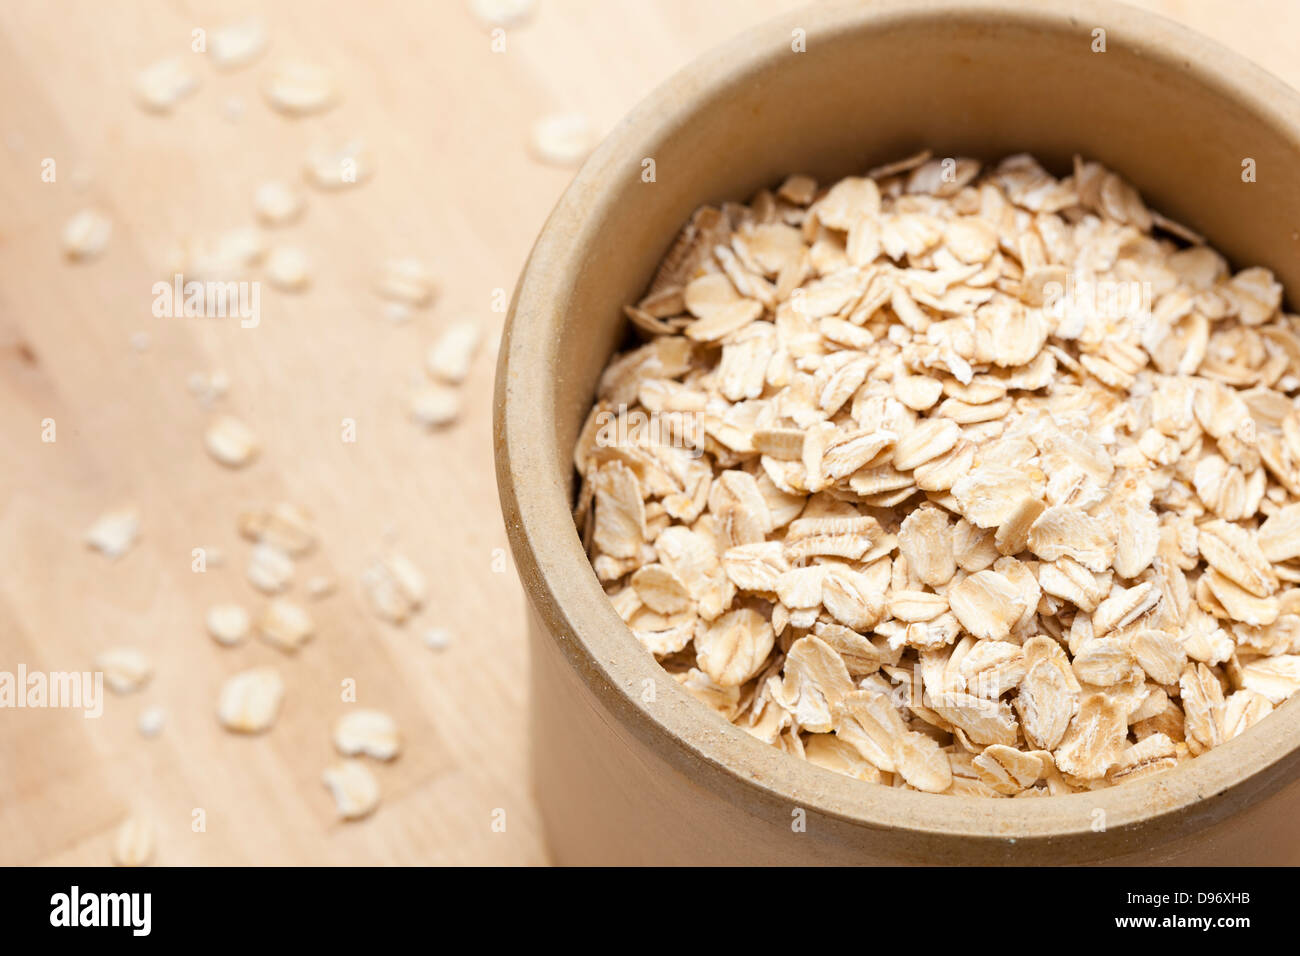 A Healthy Dry Oat meal background Stock Photo